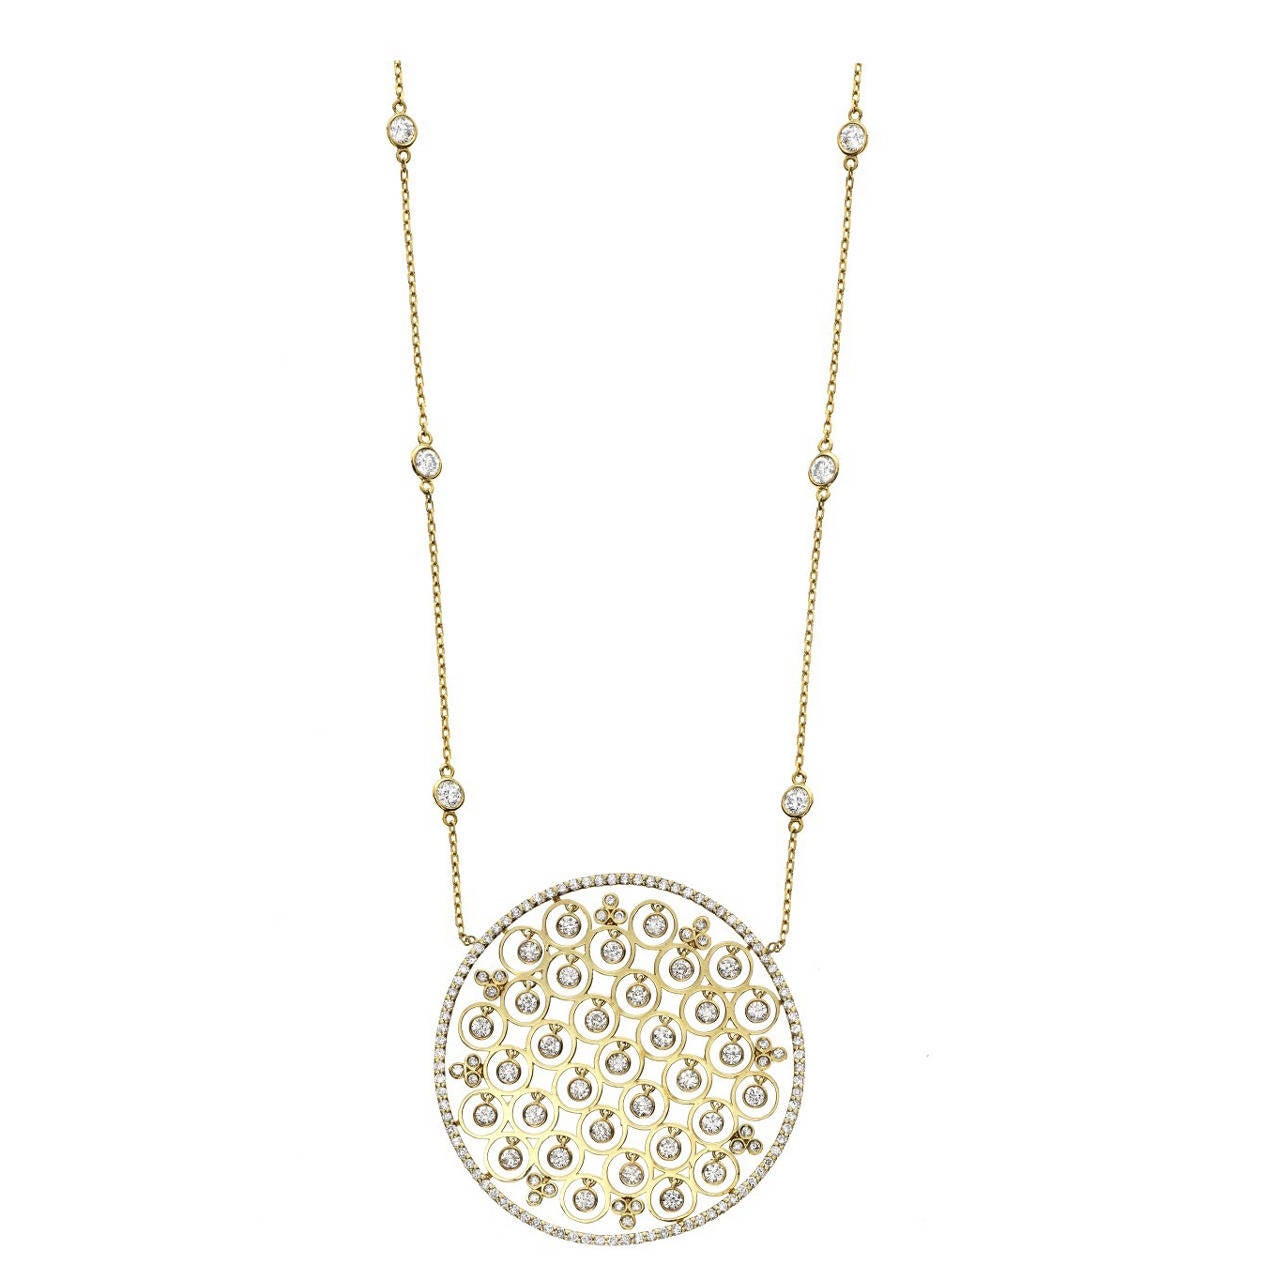 This Necklace was designed and manufactured by Emilio! 
The diamond quality are bright fine colorless diamonds/VS quality. 

The chain attached to the main piece has 10 diamond bezels.